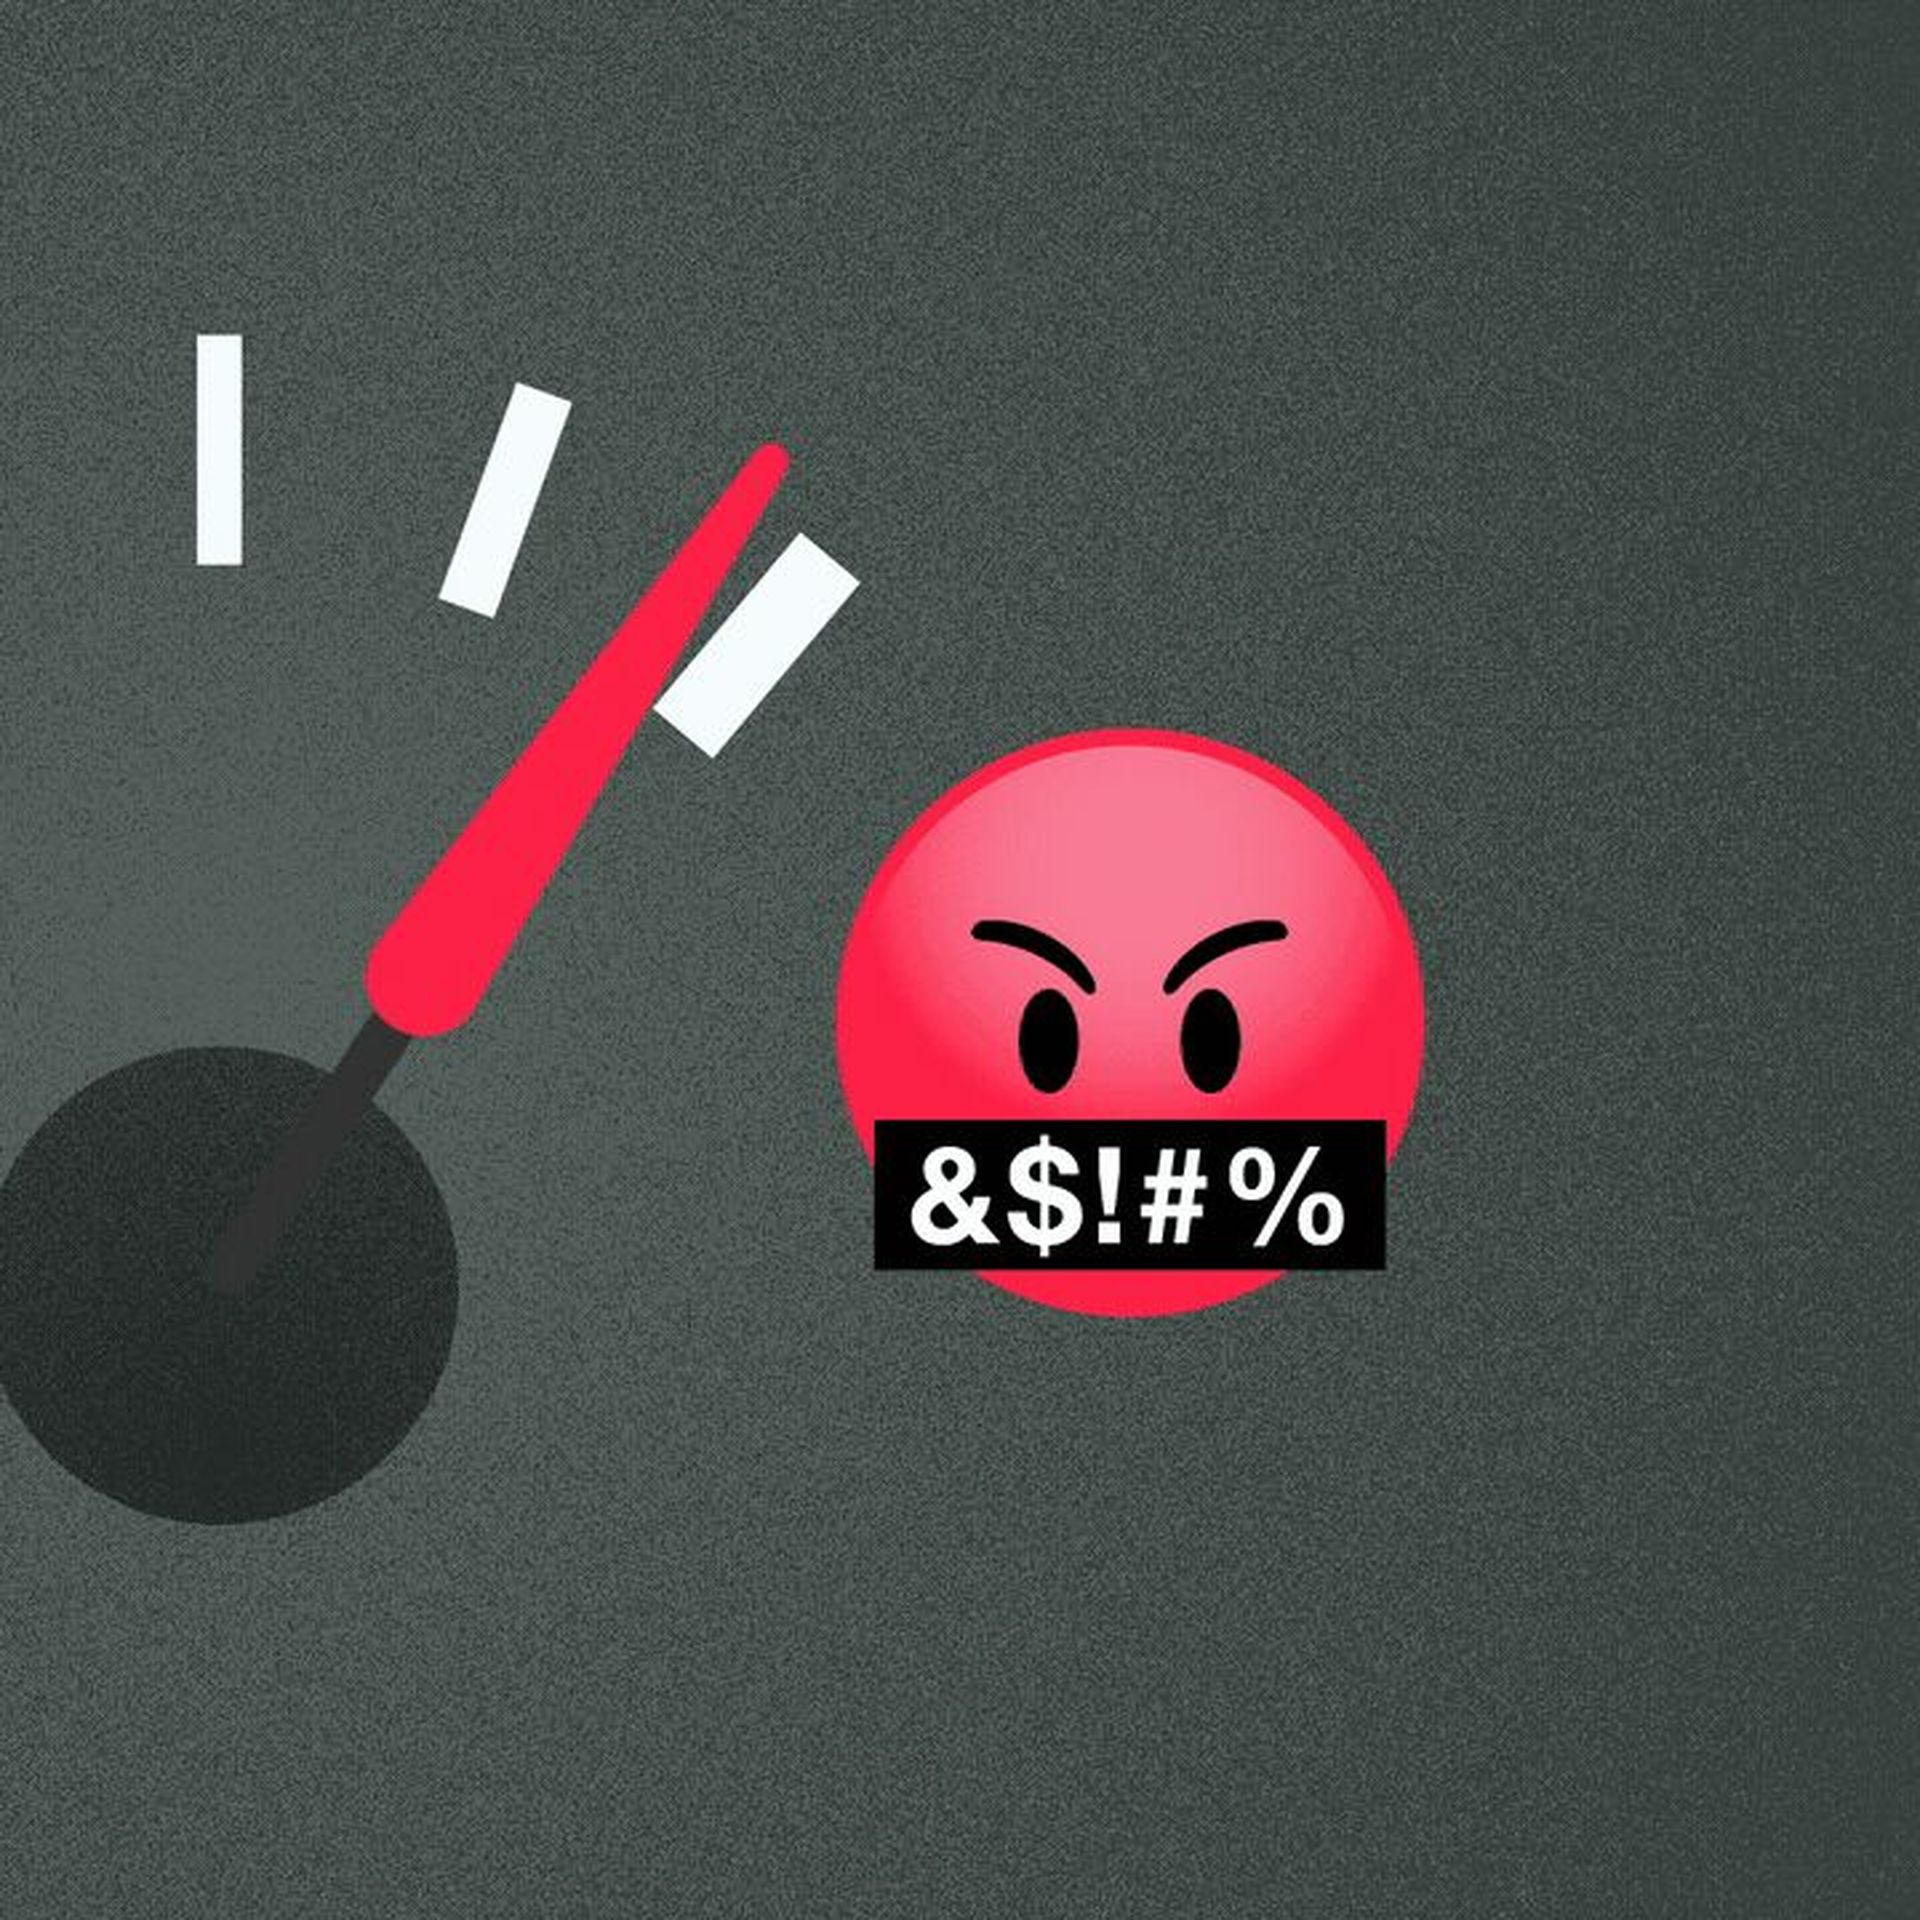 Illustration of a car gas gauge, with a neutral emoji on the left and a swearing emoji on the right, and the needle reaching the swearing side.